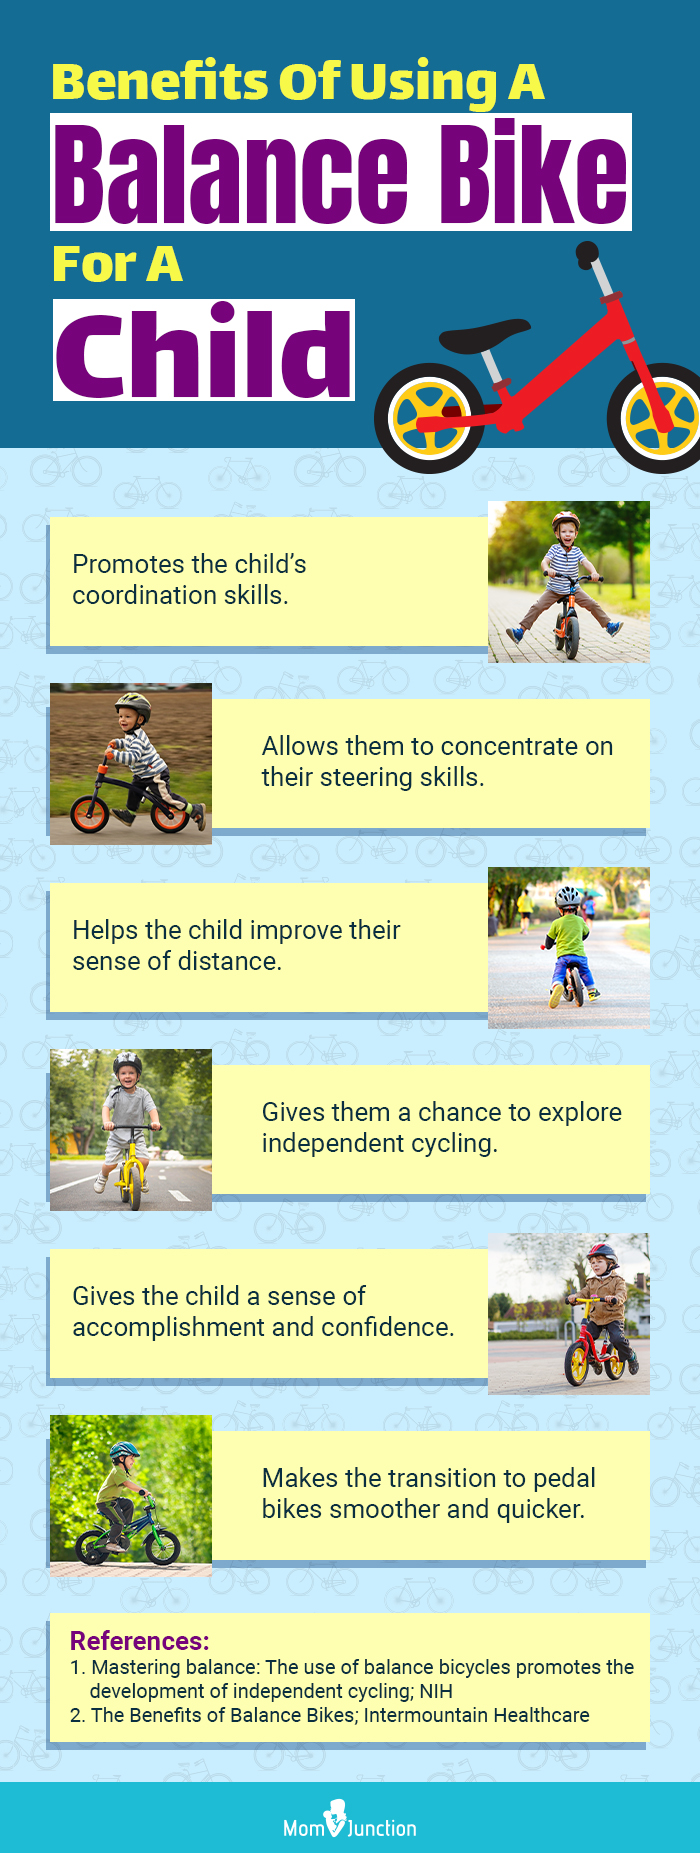 Benefits Of Using A Balance Bike For A Child (infographic)